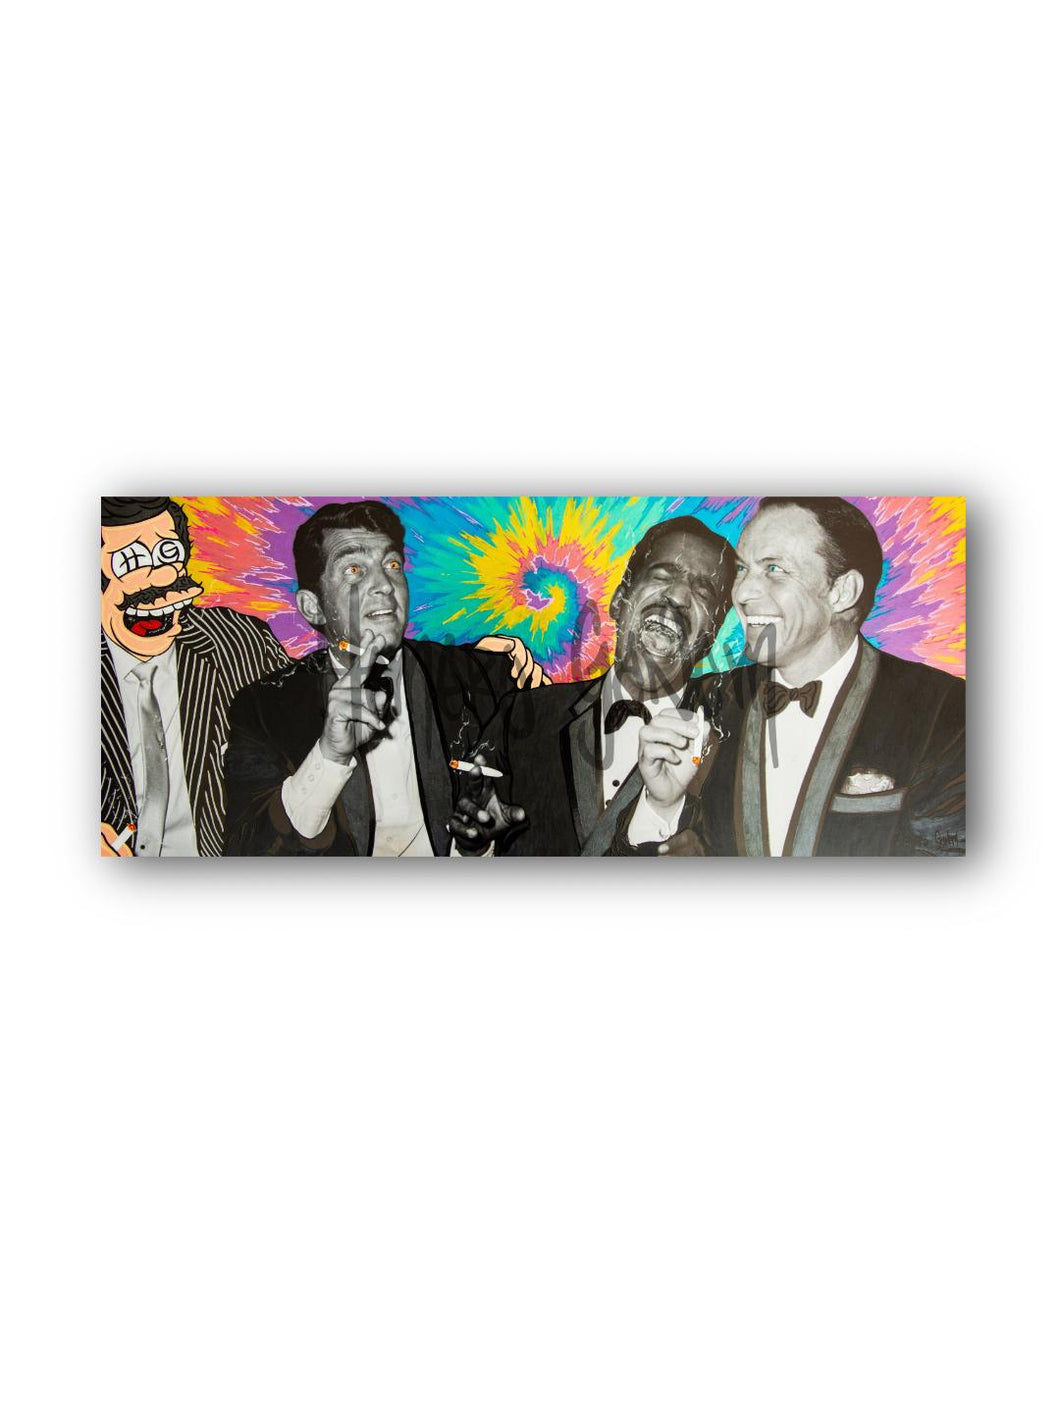 Laughs with Mary Jane: Rat Pack, 2020